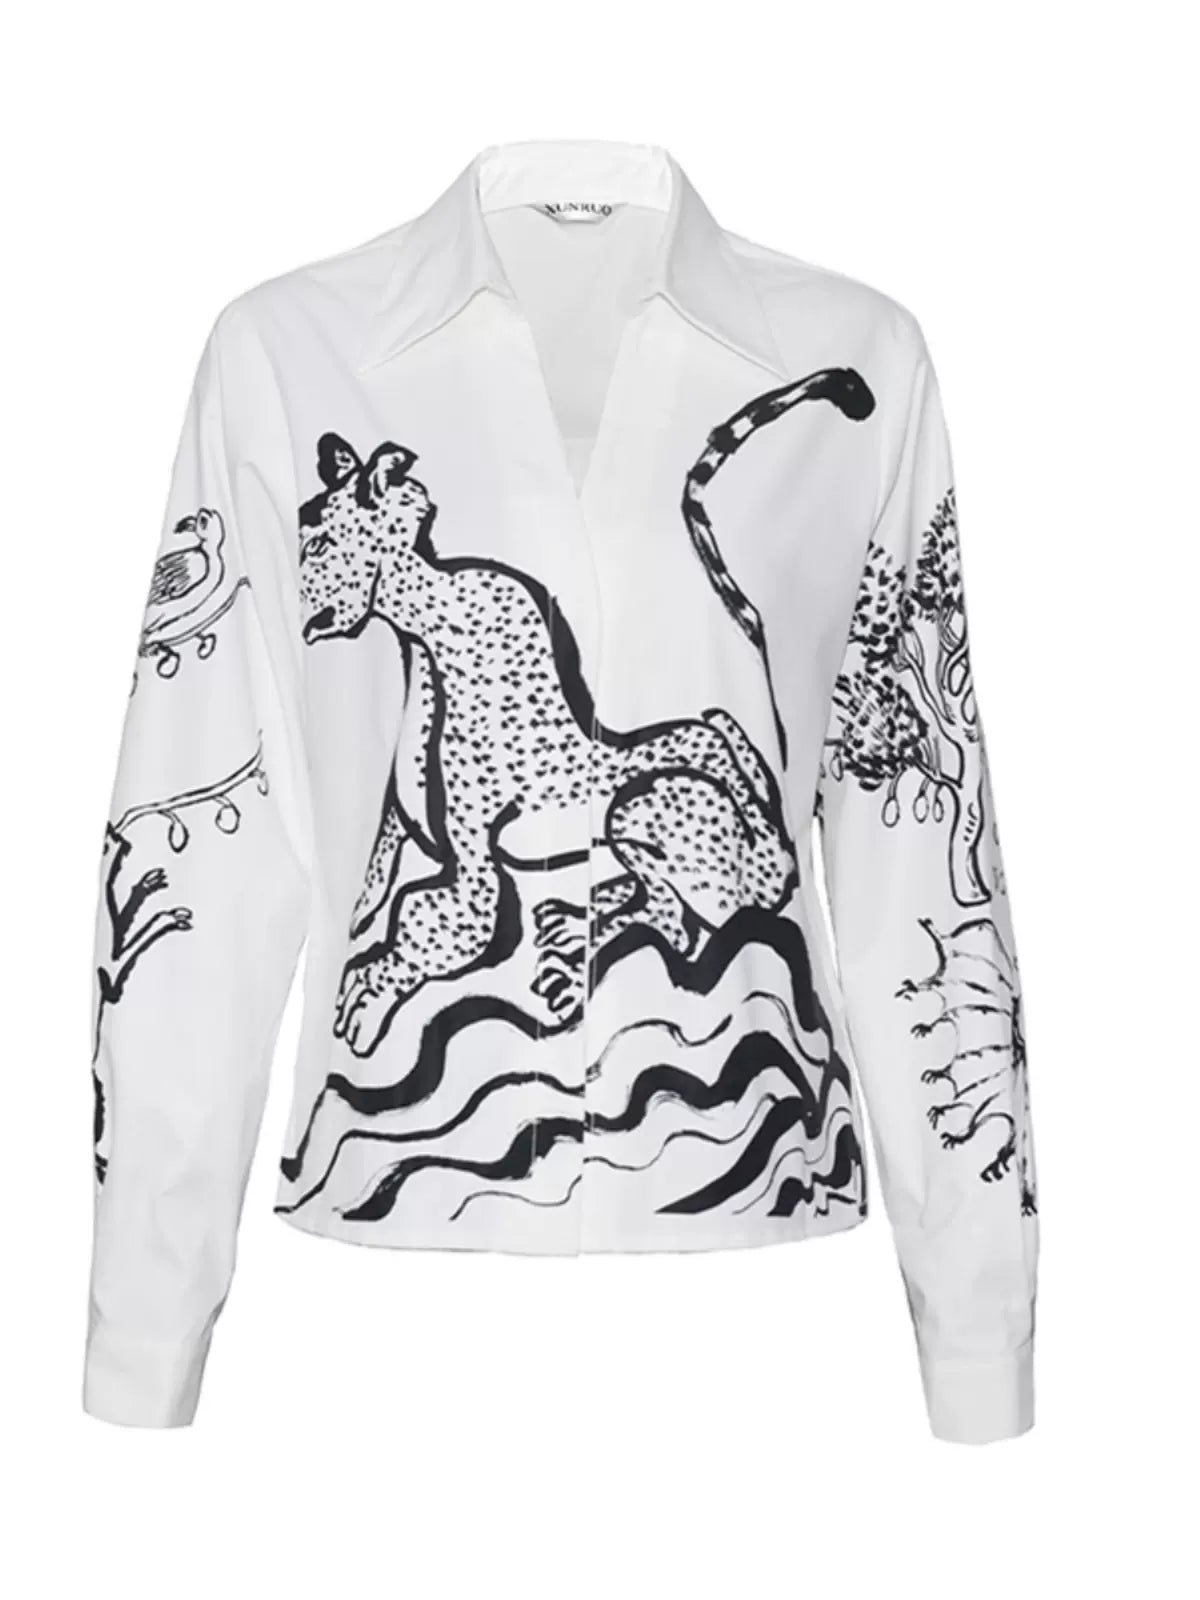 leopard panther print long sleeved black and white shirt 